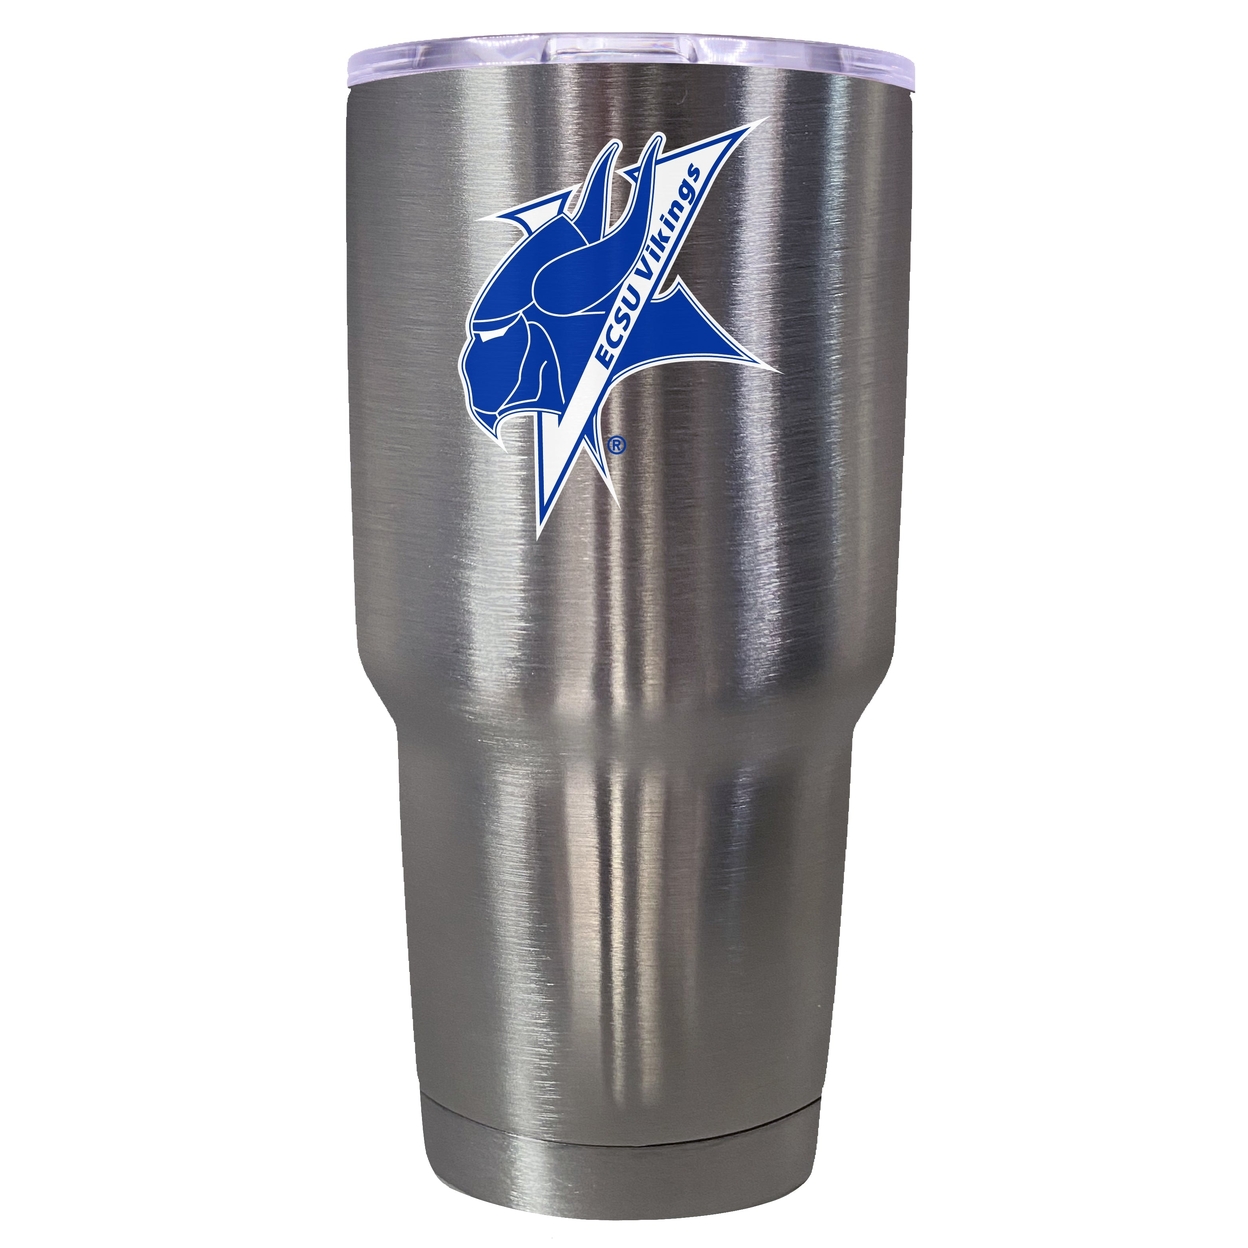 Elizabeth City State University 24 Oz Insulated Stainless Steel Tumbler